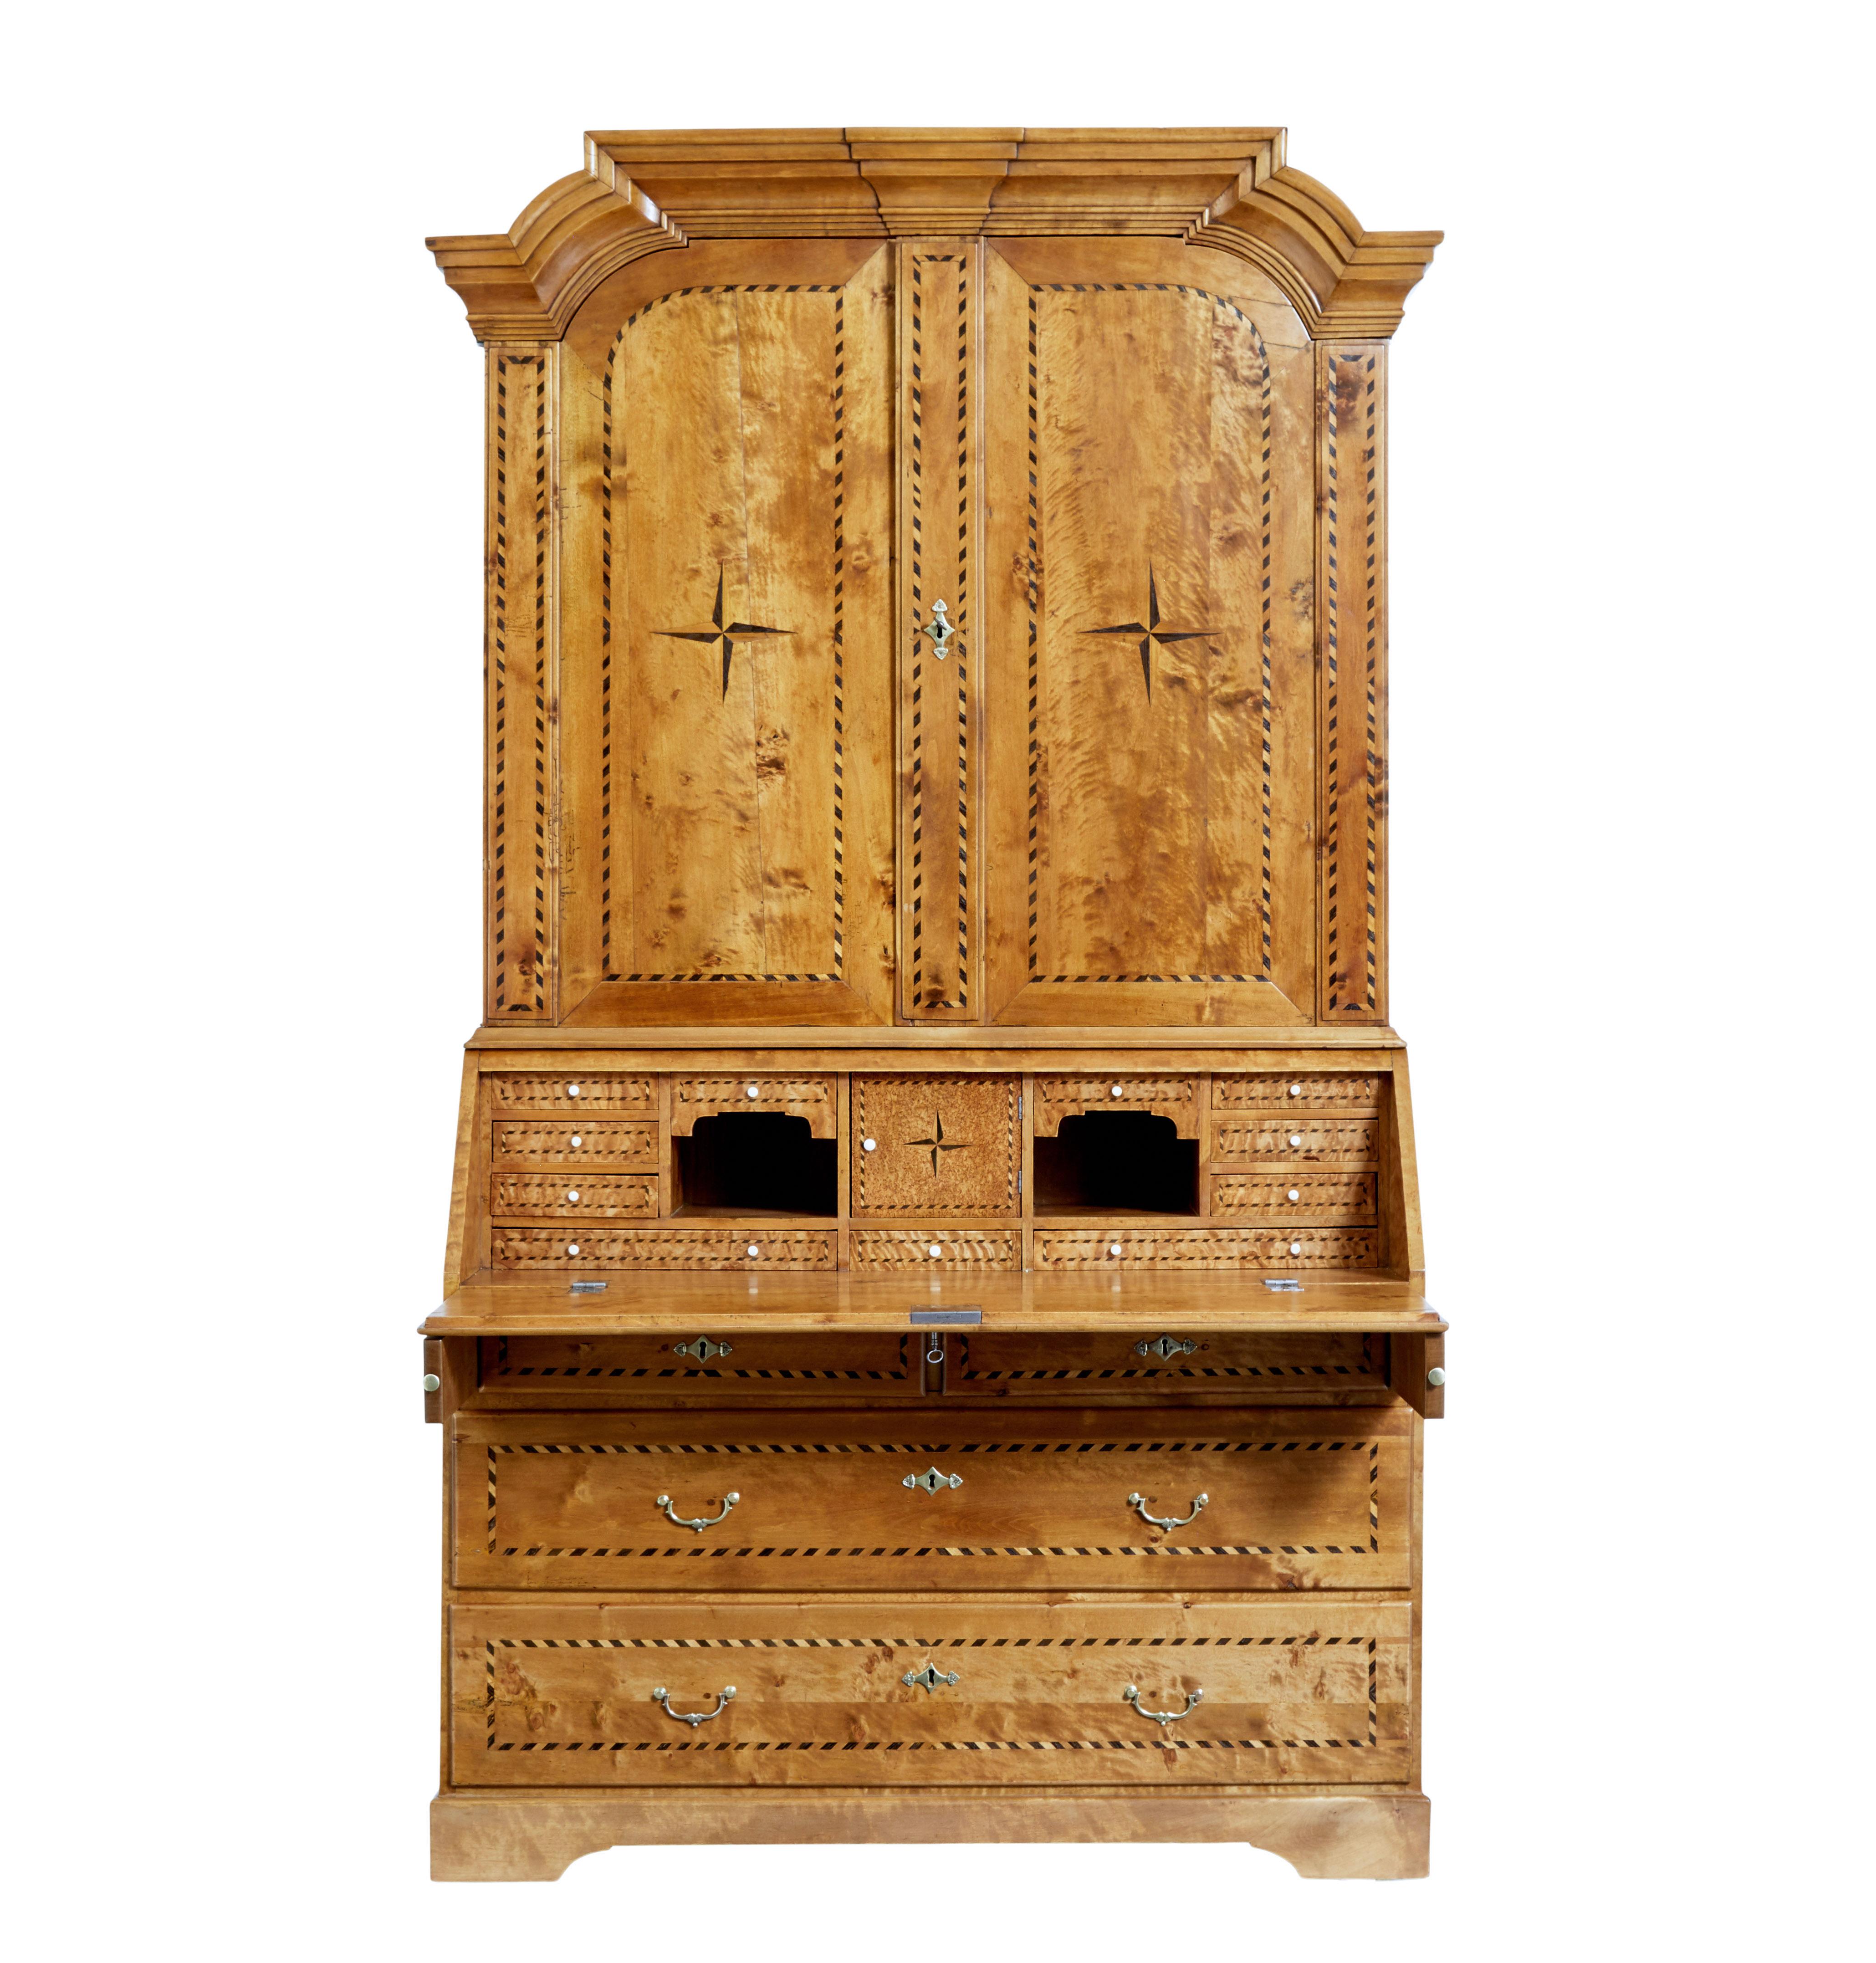 Swedish 1870s Birch Inlaid Secretary with Inlaid Motifs and Slant Front Desk For Sale 5